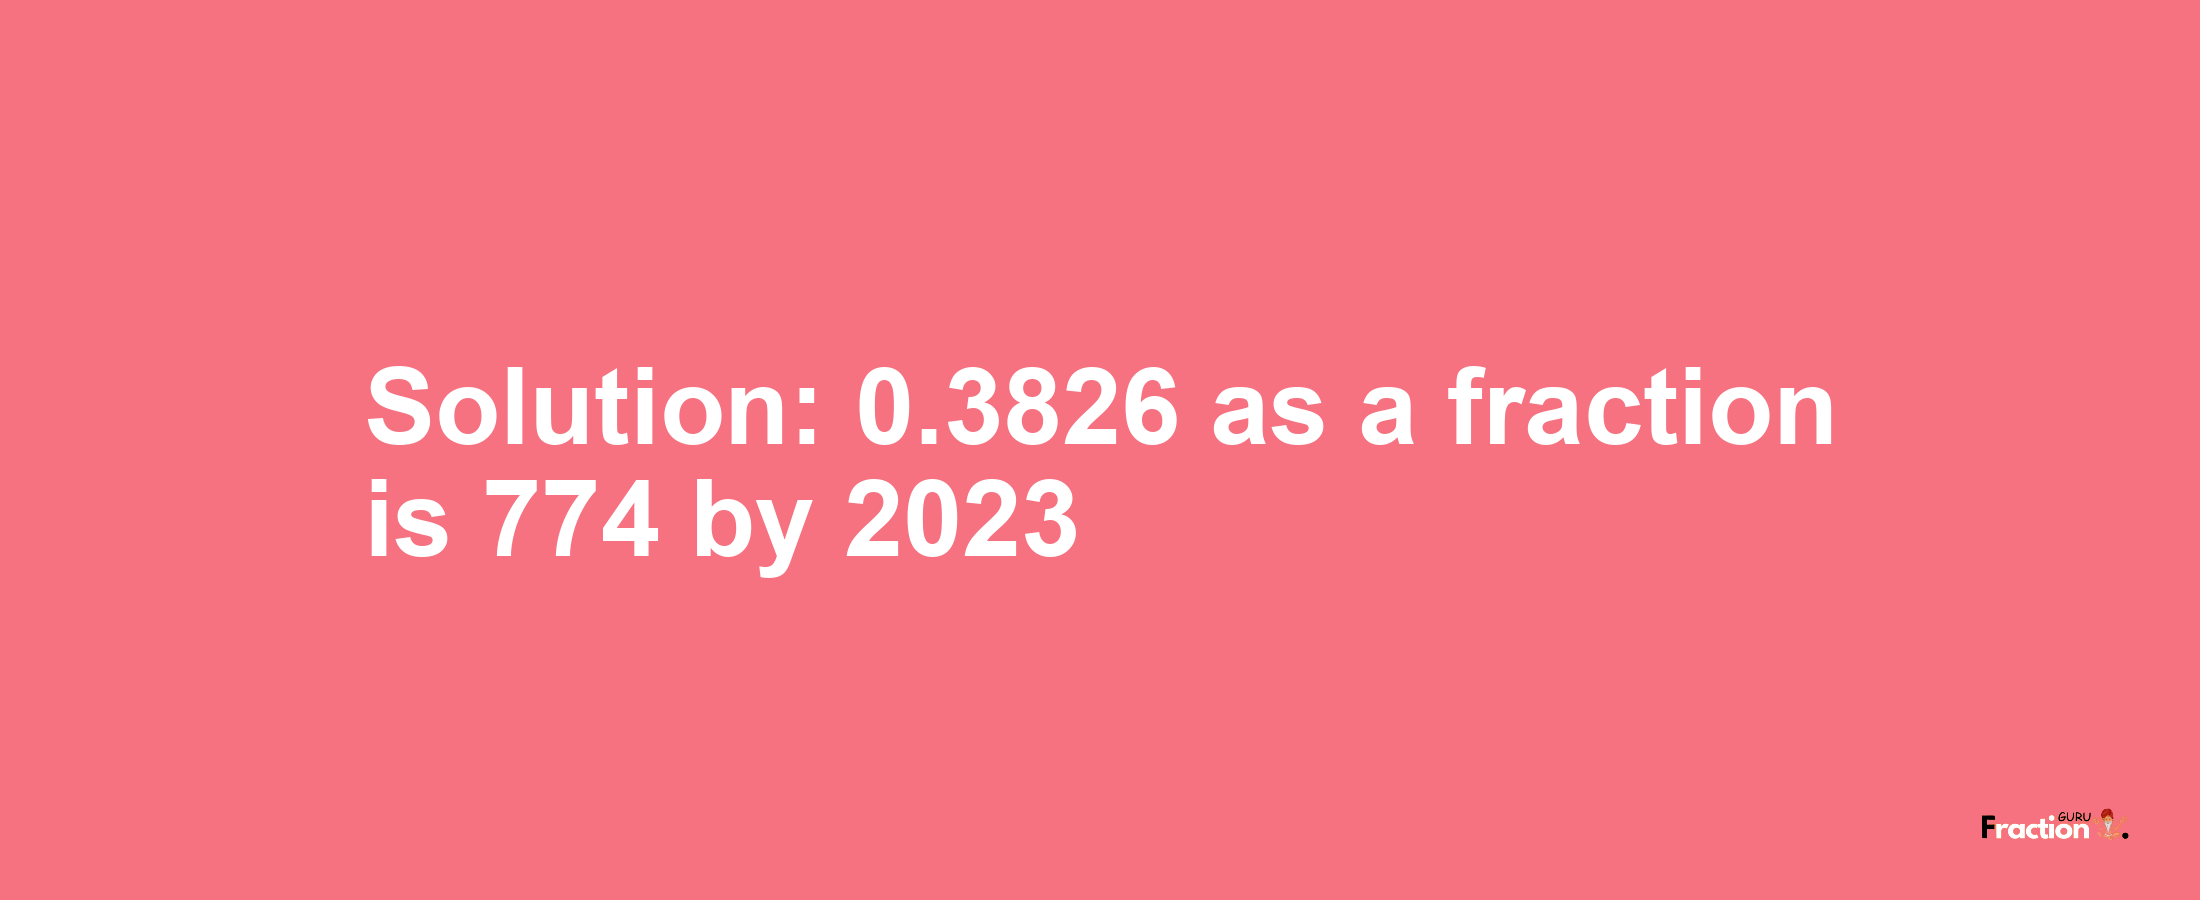 Solution:0.3826 as a fraction is 774/2023